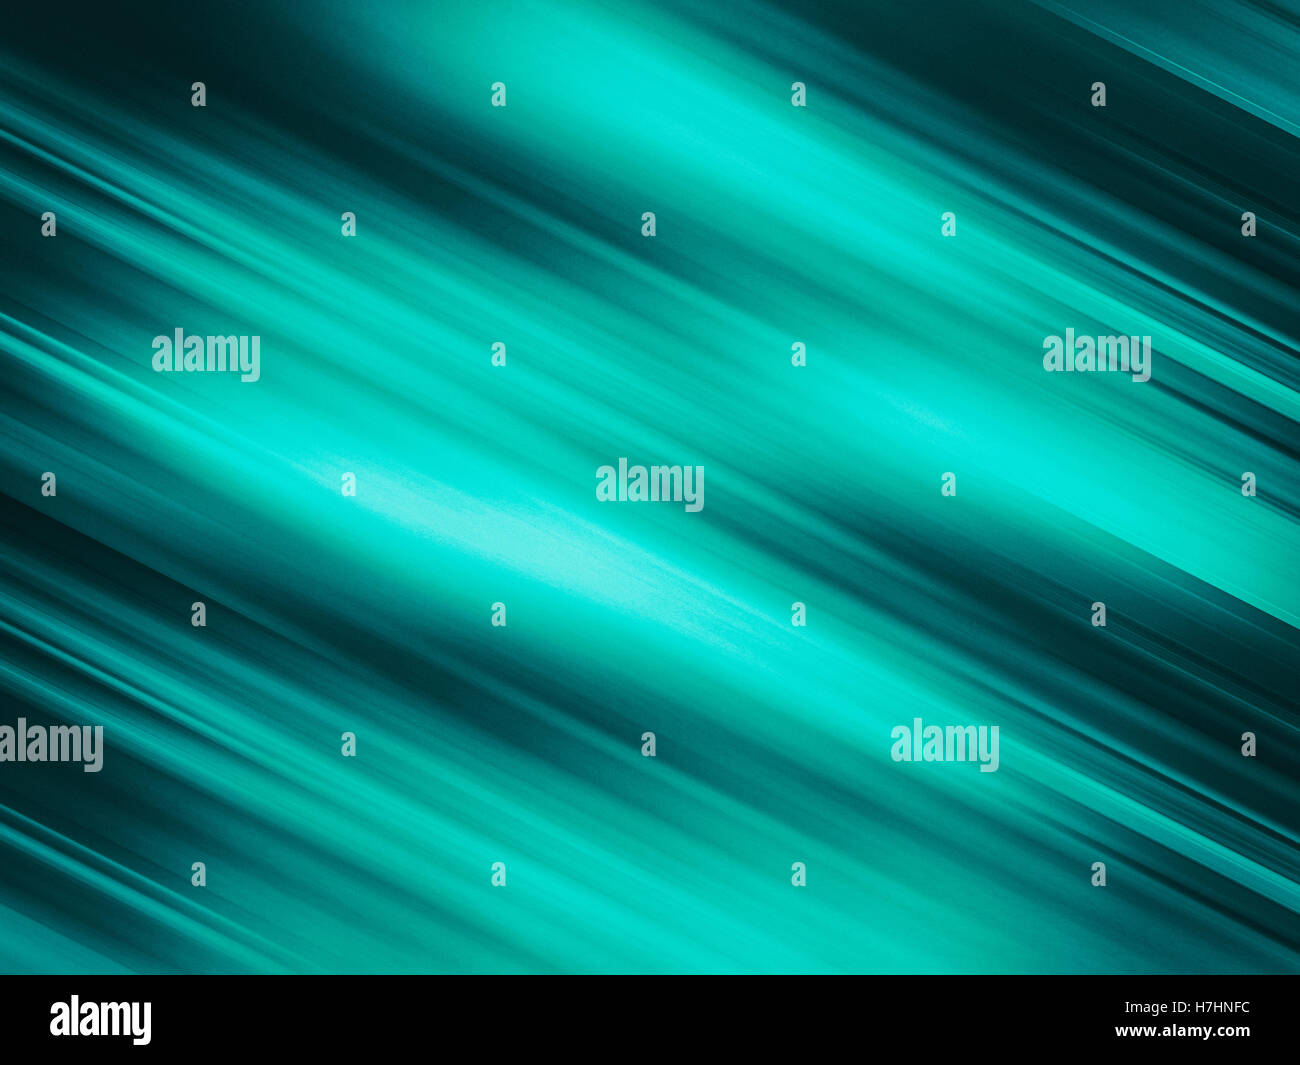 Abstract background blur motion green style Stock Photo